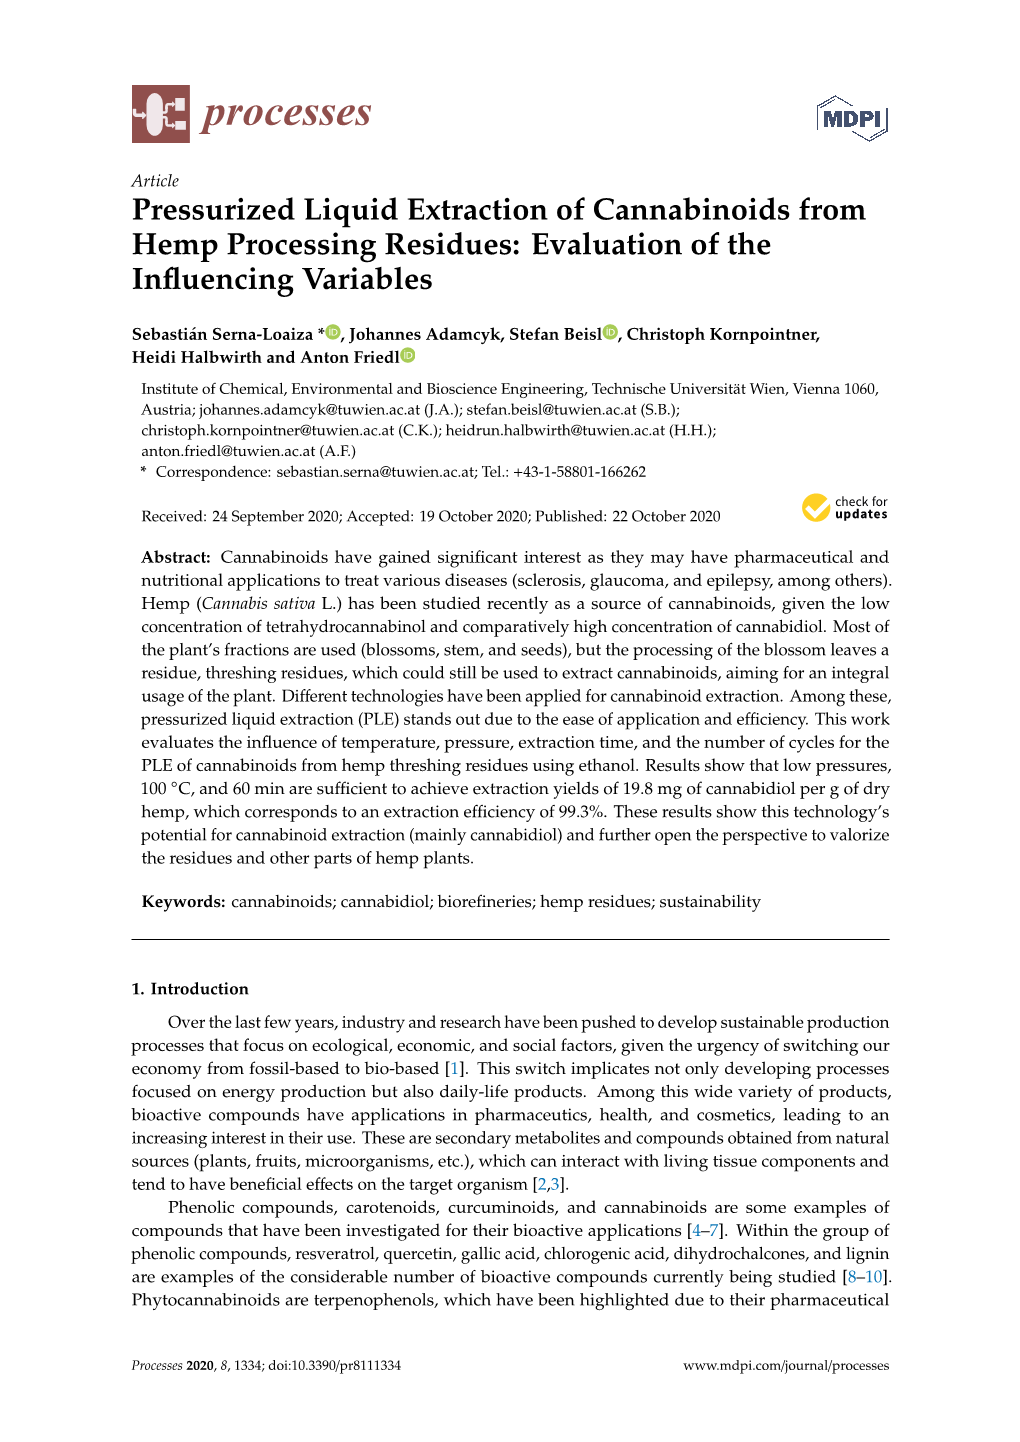 Pressurized Liquid Extraction of Cannabinoids from Hemp Processing Residues: Evaluation of the Inﬂuencing Variables